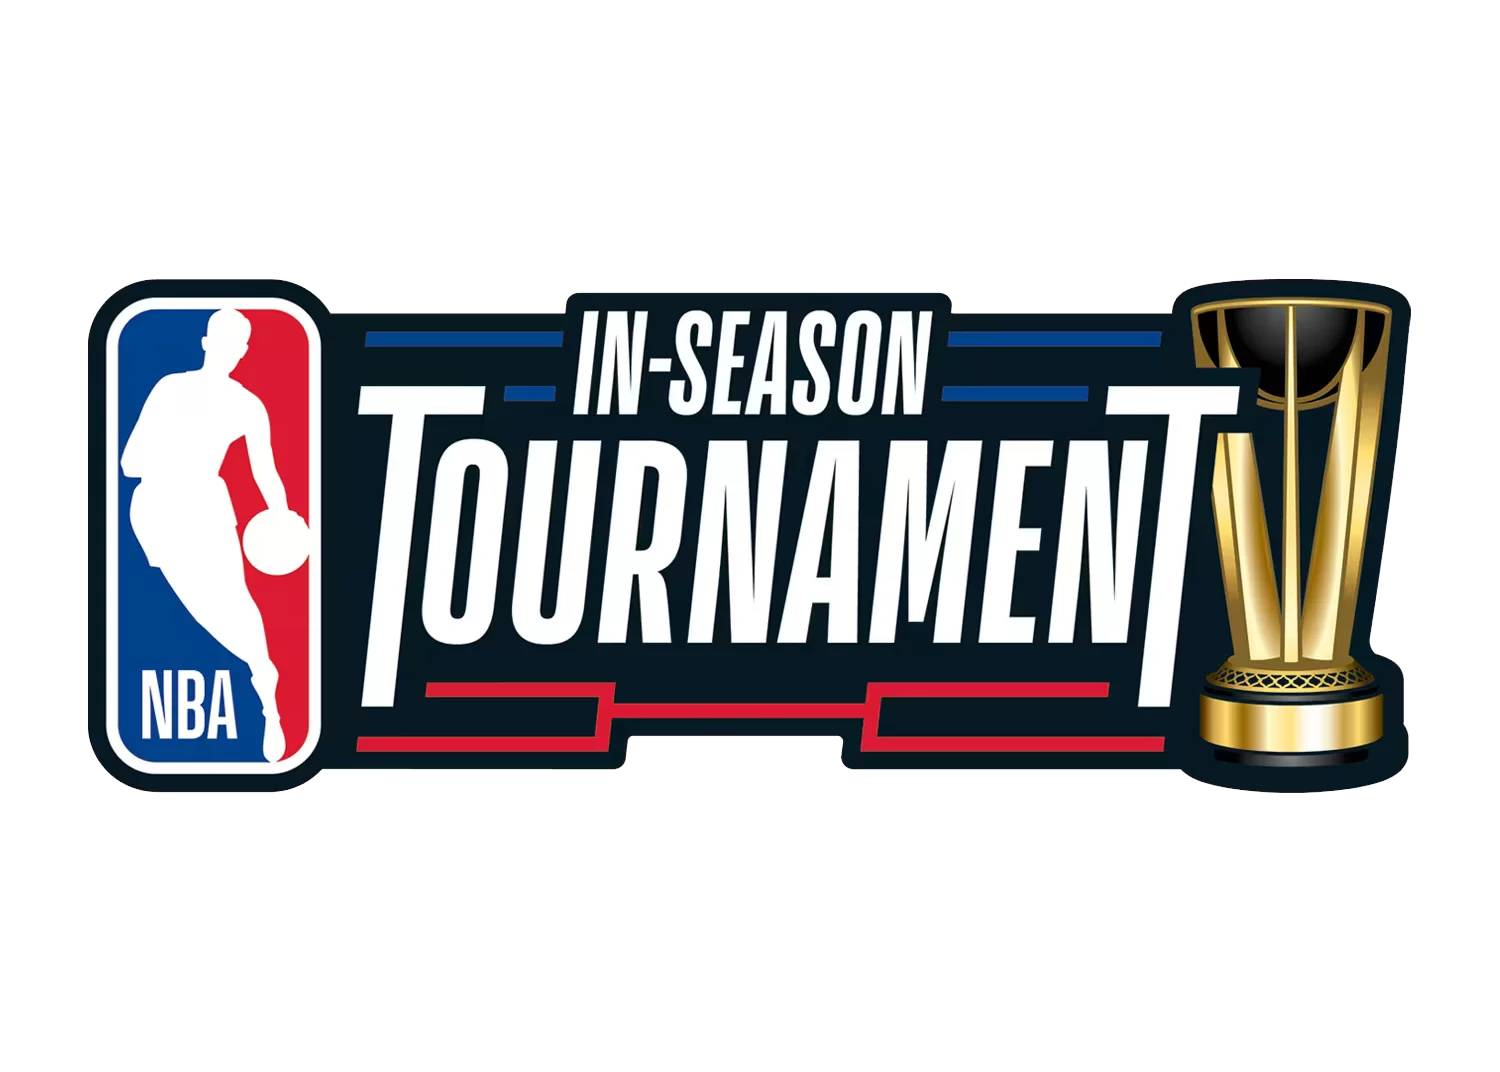 How to Watch Lakers vs. Pacers in NBA In-Season Tournament Finals Live on December 9 on Roku, Fire TV, Apple TV, & More